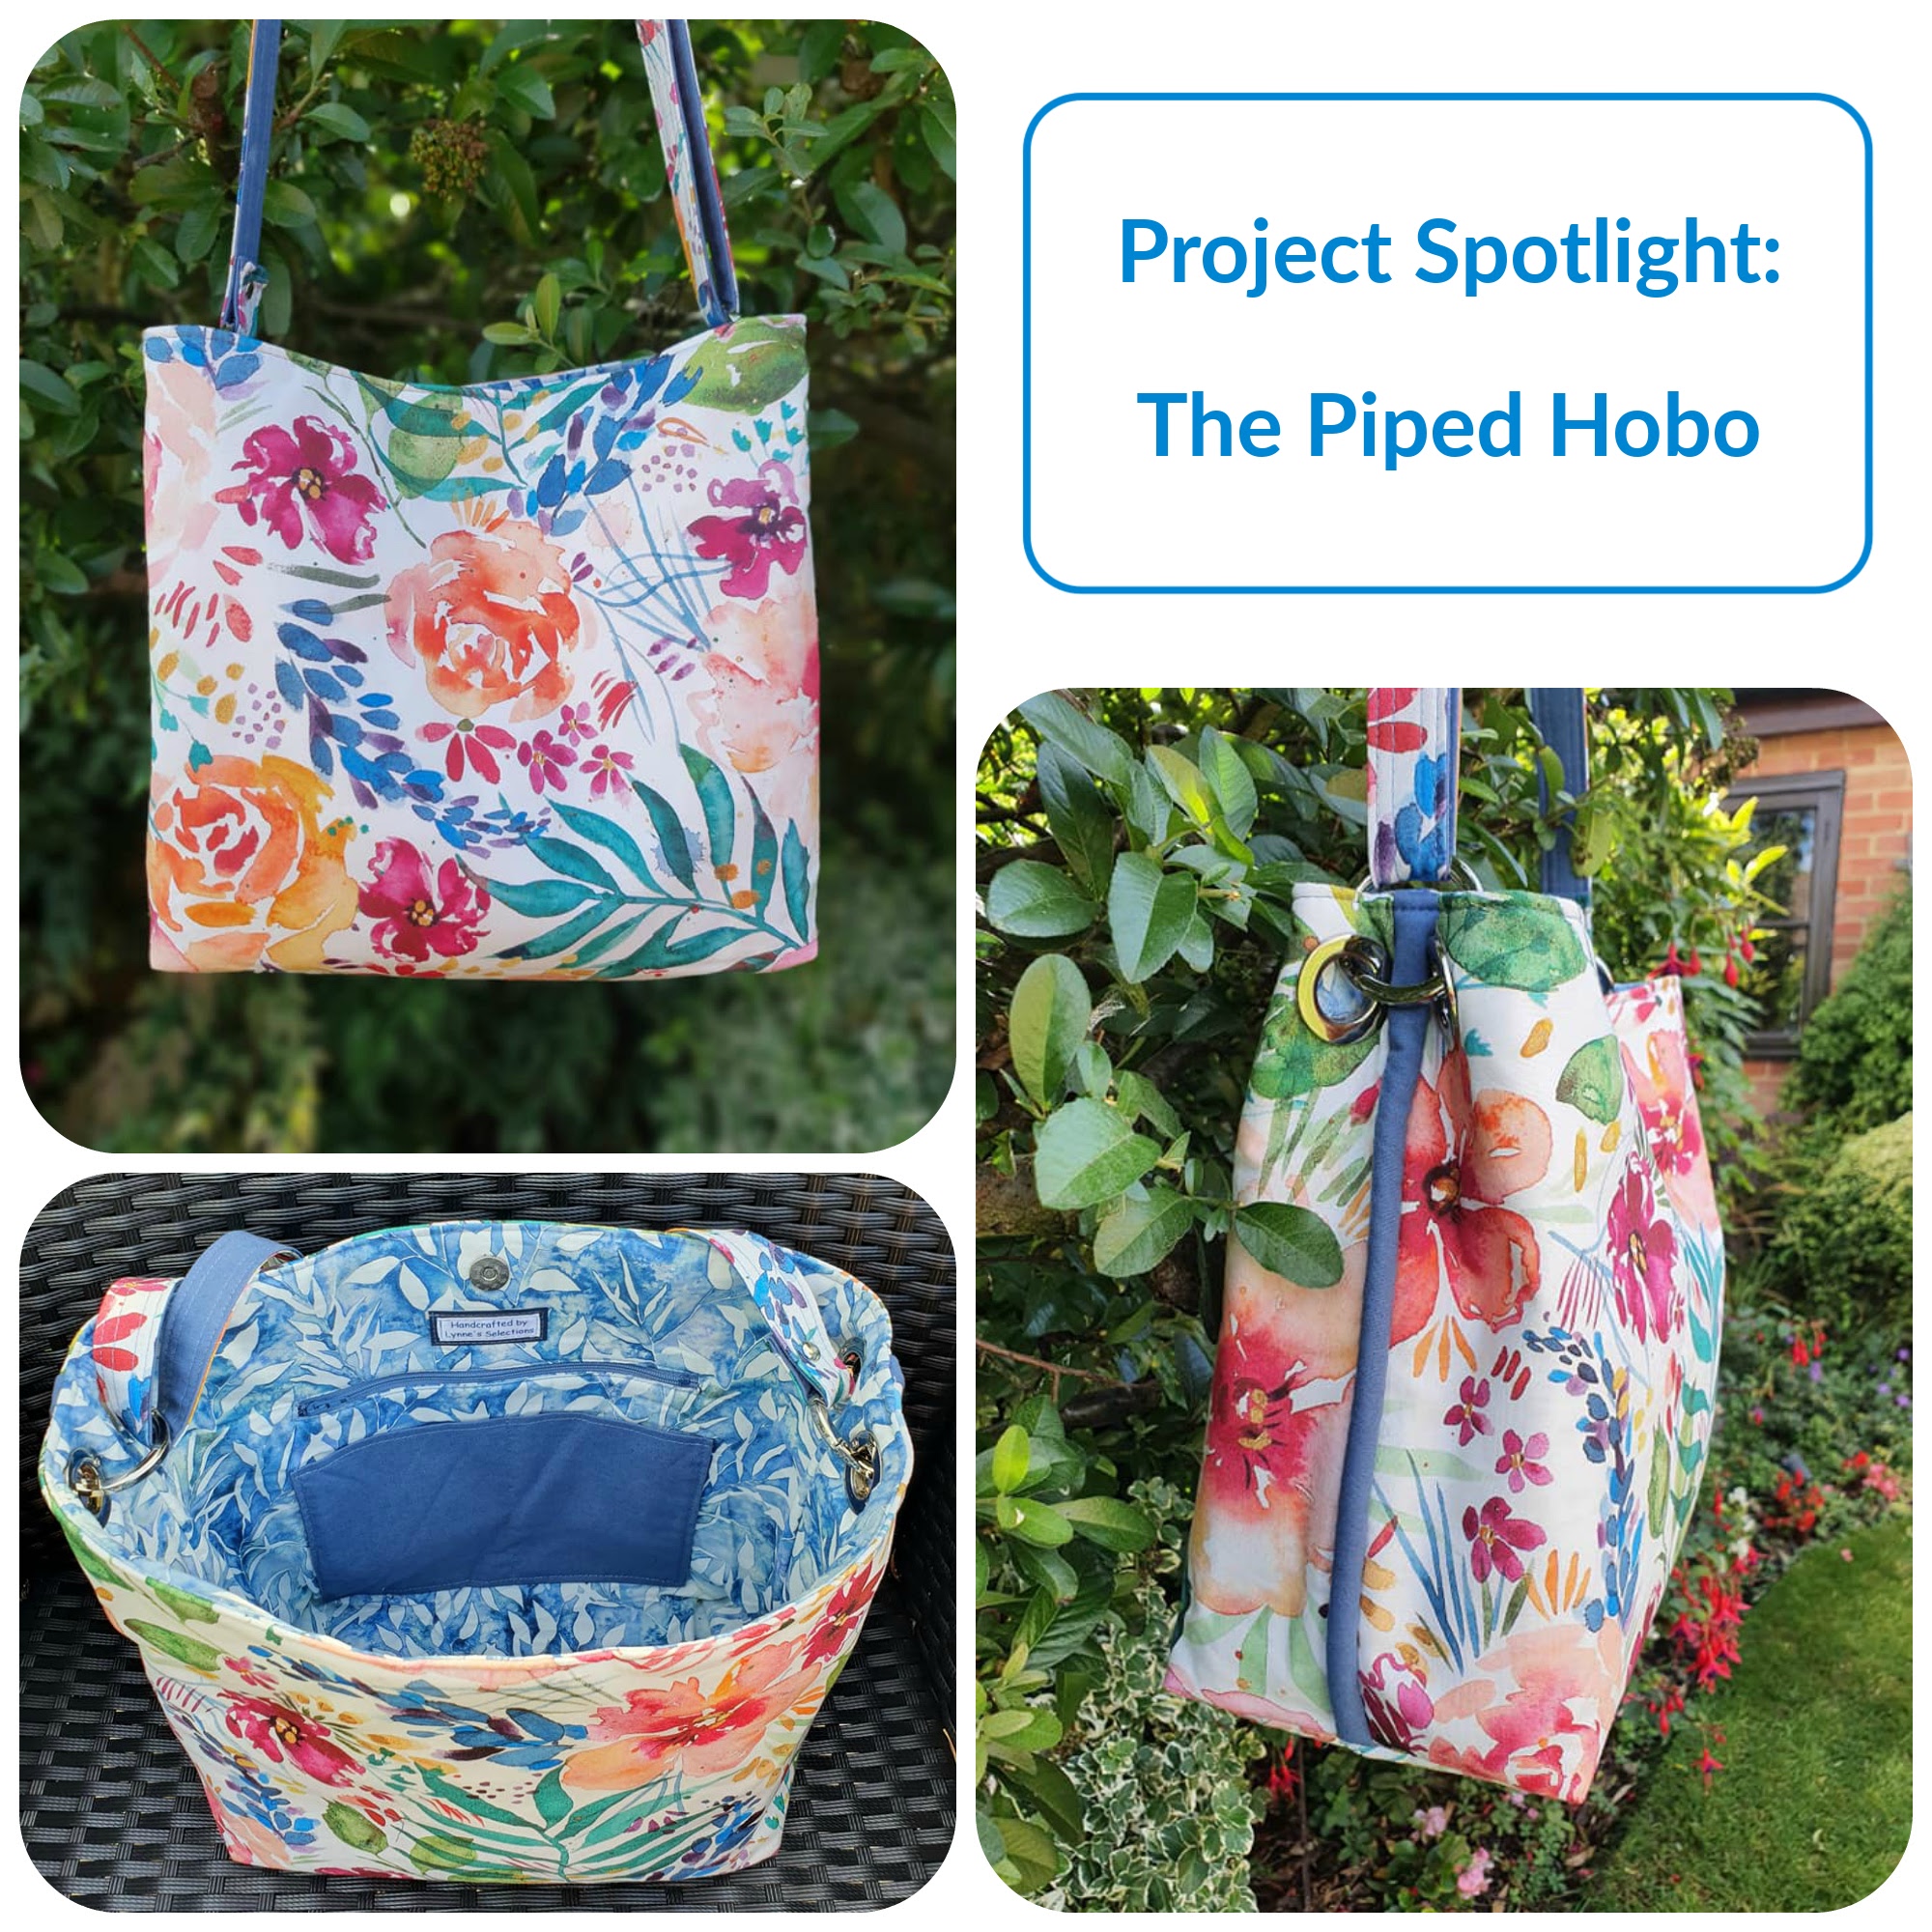 The Piped Hobo from The Complete Bag Making Masterclass by Samantha Hussey